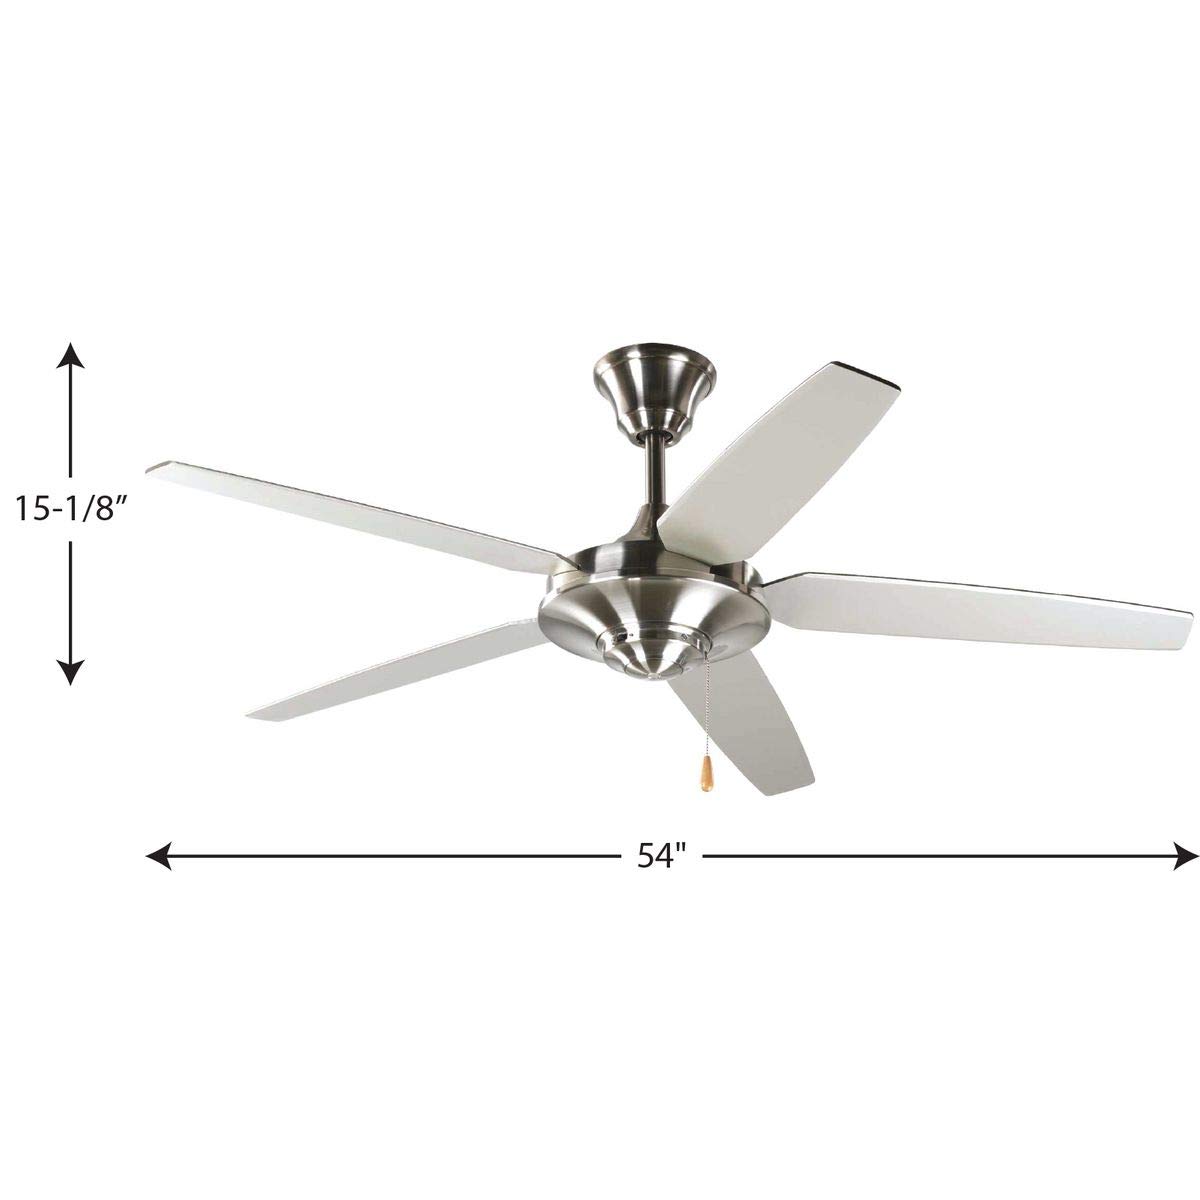 Progress Lighting P2530-09 54-Inch 5 Star Fan with Reversible Silver/Natural Cherry Blades, Brushed Nickel